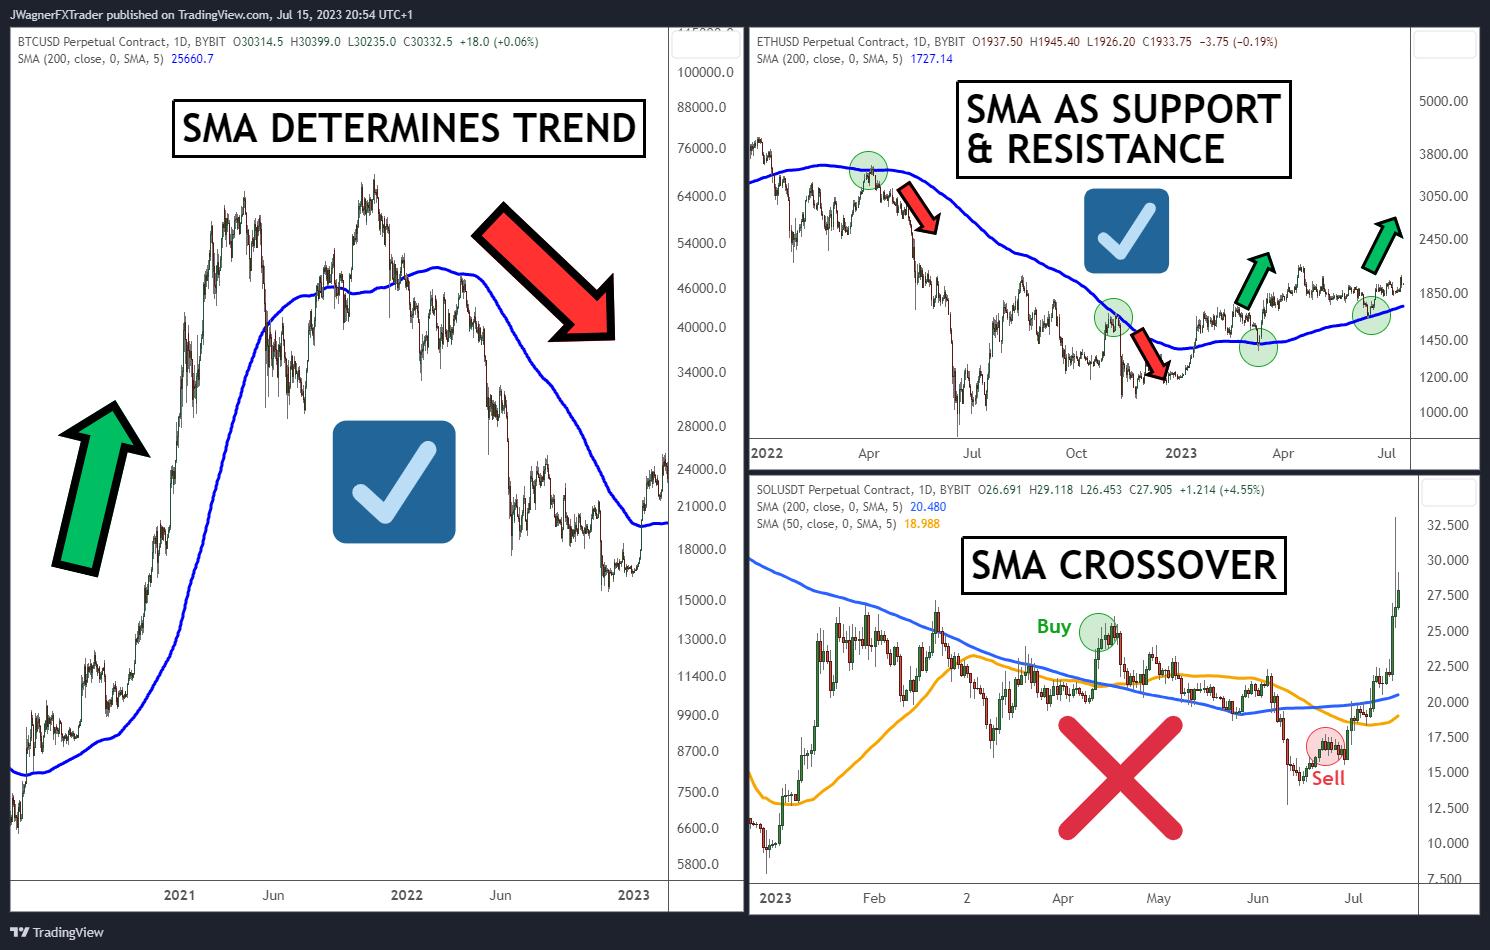 The three uses of simple moving average: to determine trend, as support and resistance, and crossover.